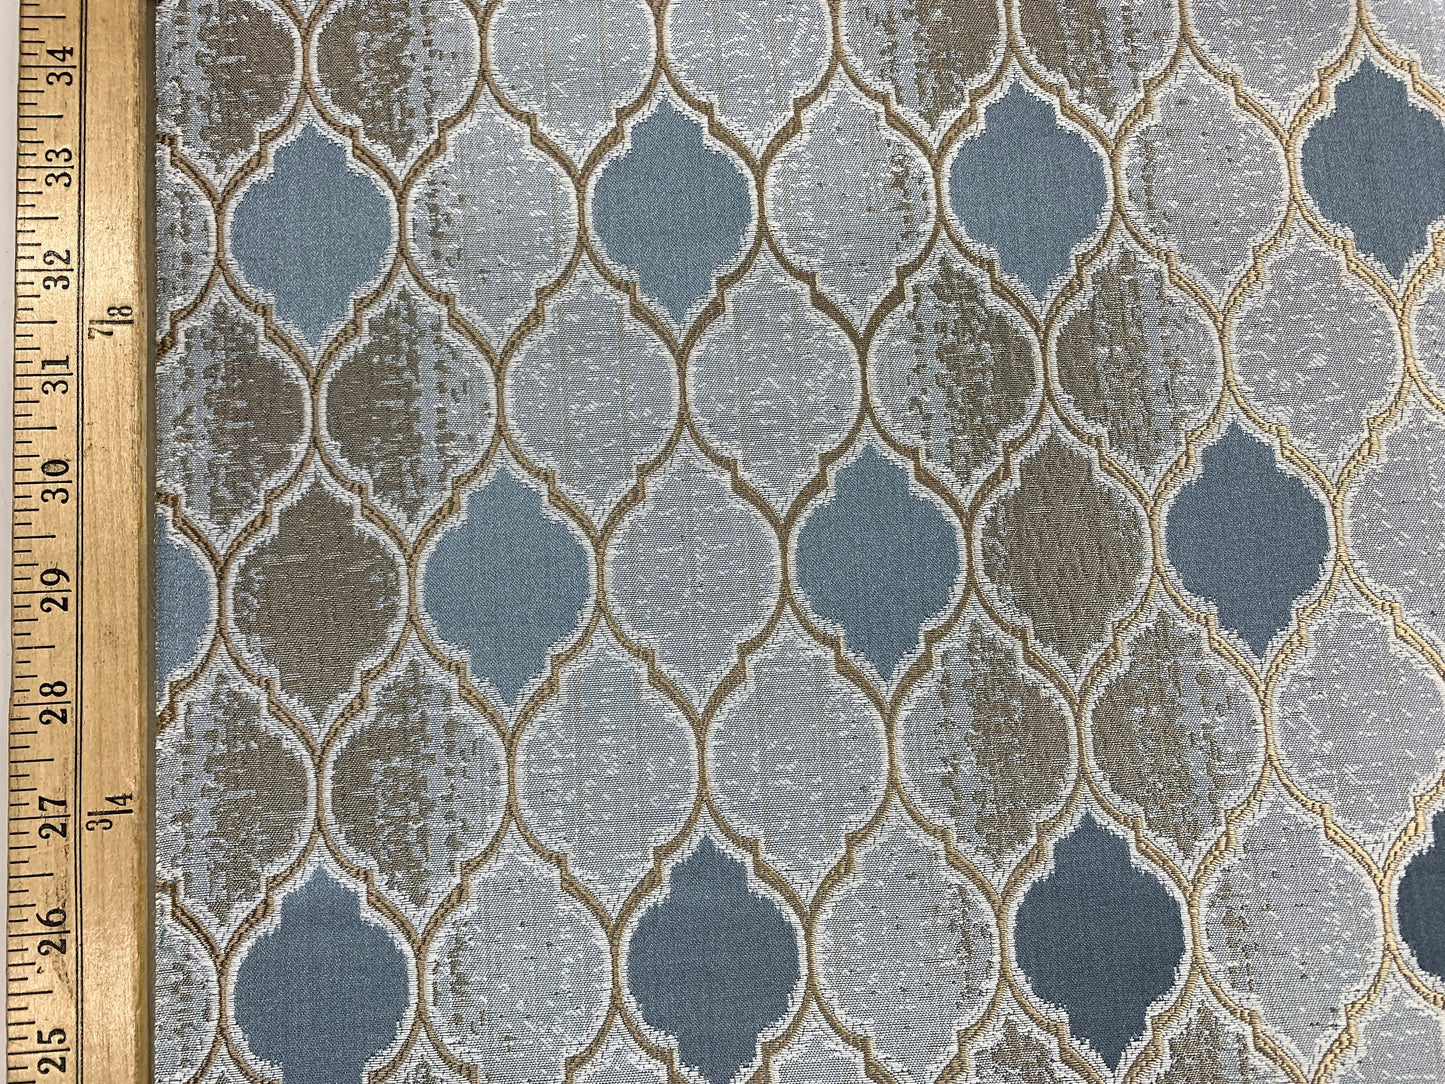 BLUE GOLD Trellis Brocade Upholstery Drapery Fabric (110 in.) Sold By The Yard